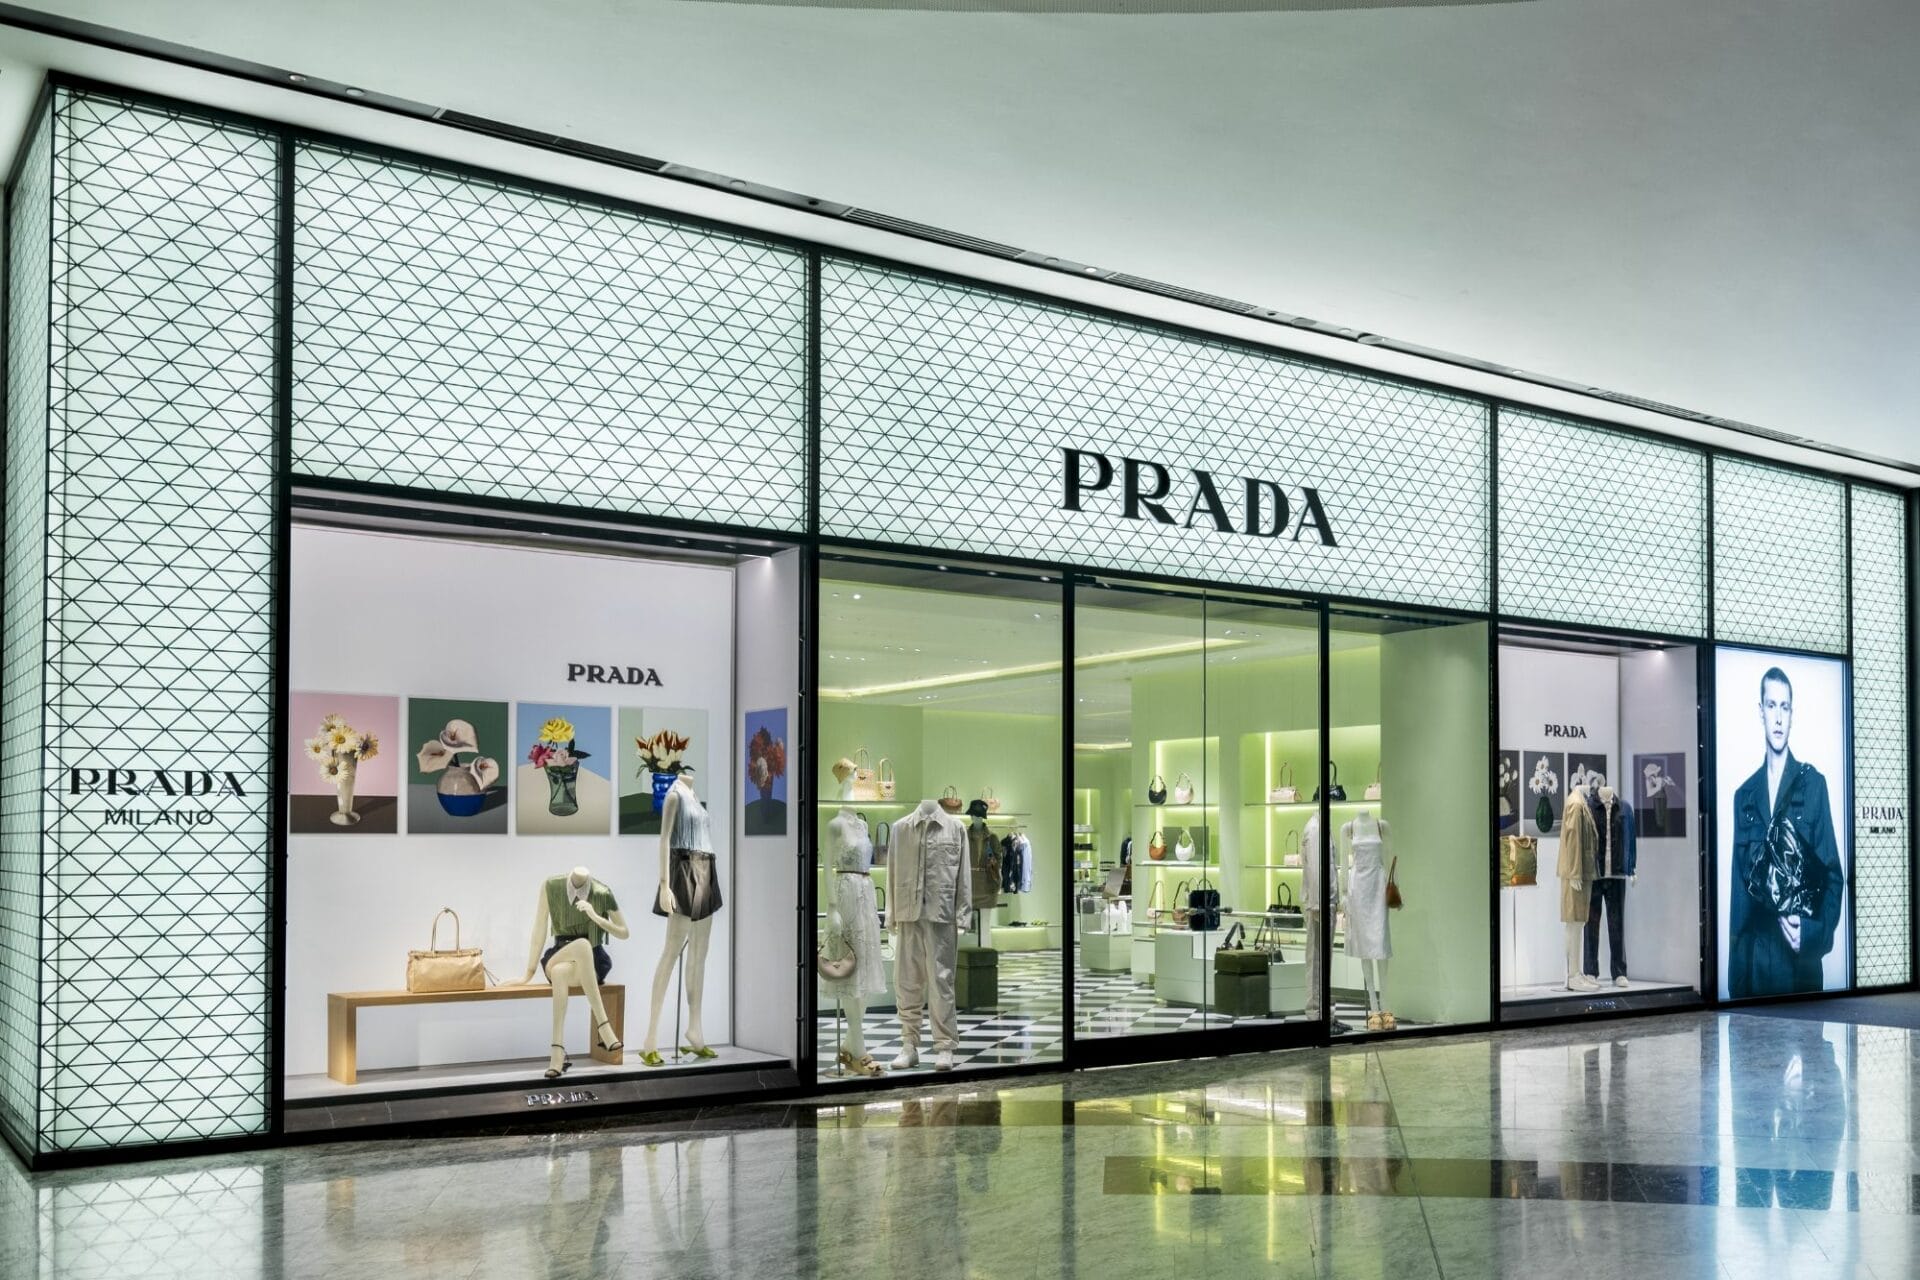 Prada has officially opened the doors to its newest boutique at The Exchange TRX.